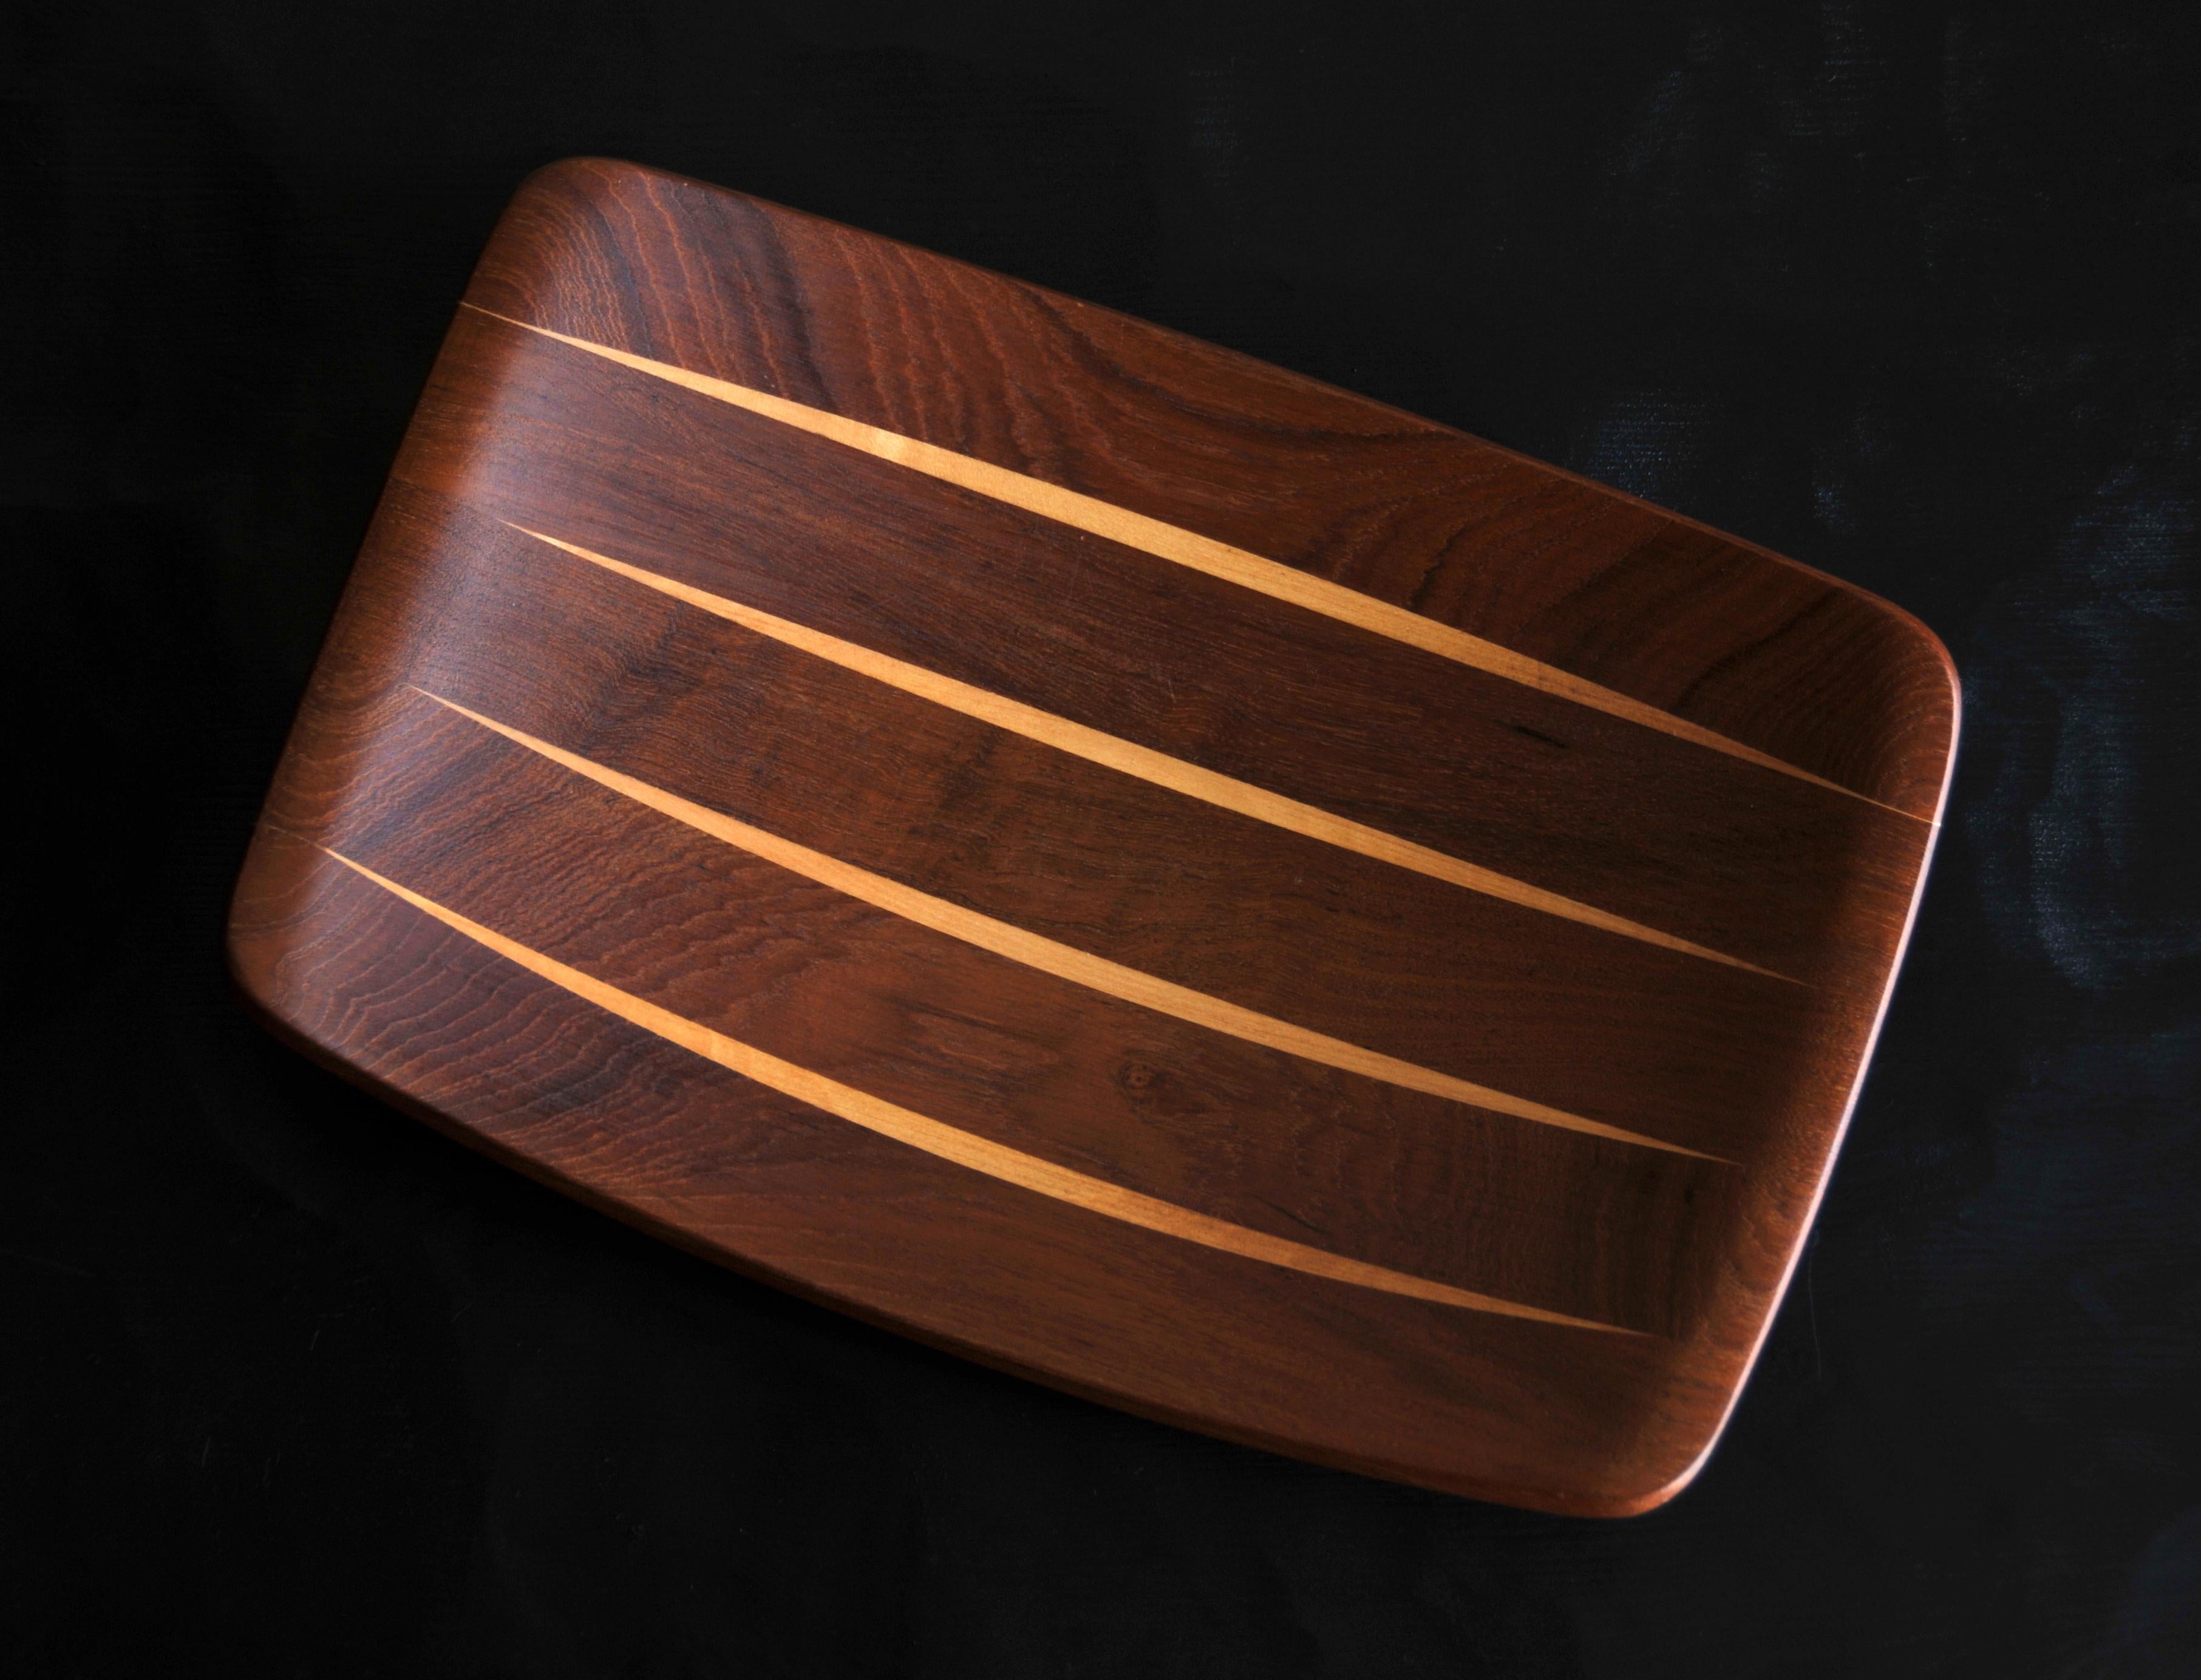 A remarkable teak and birch striped tray meticulously crafted by renowned Norwegian artist Arne Tidemand Ruud in 1959. It captures the essence of the era's design and craftsmanship, adding an extra touch of elegance to any room.

Features:
• Design: